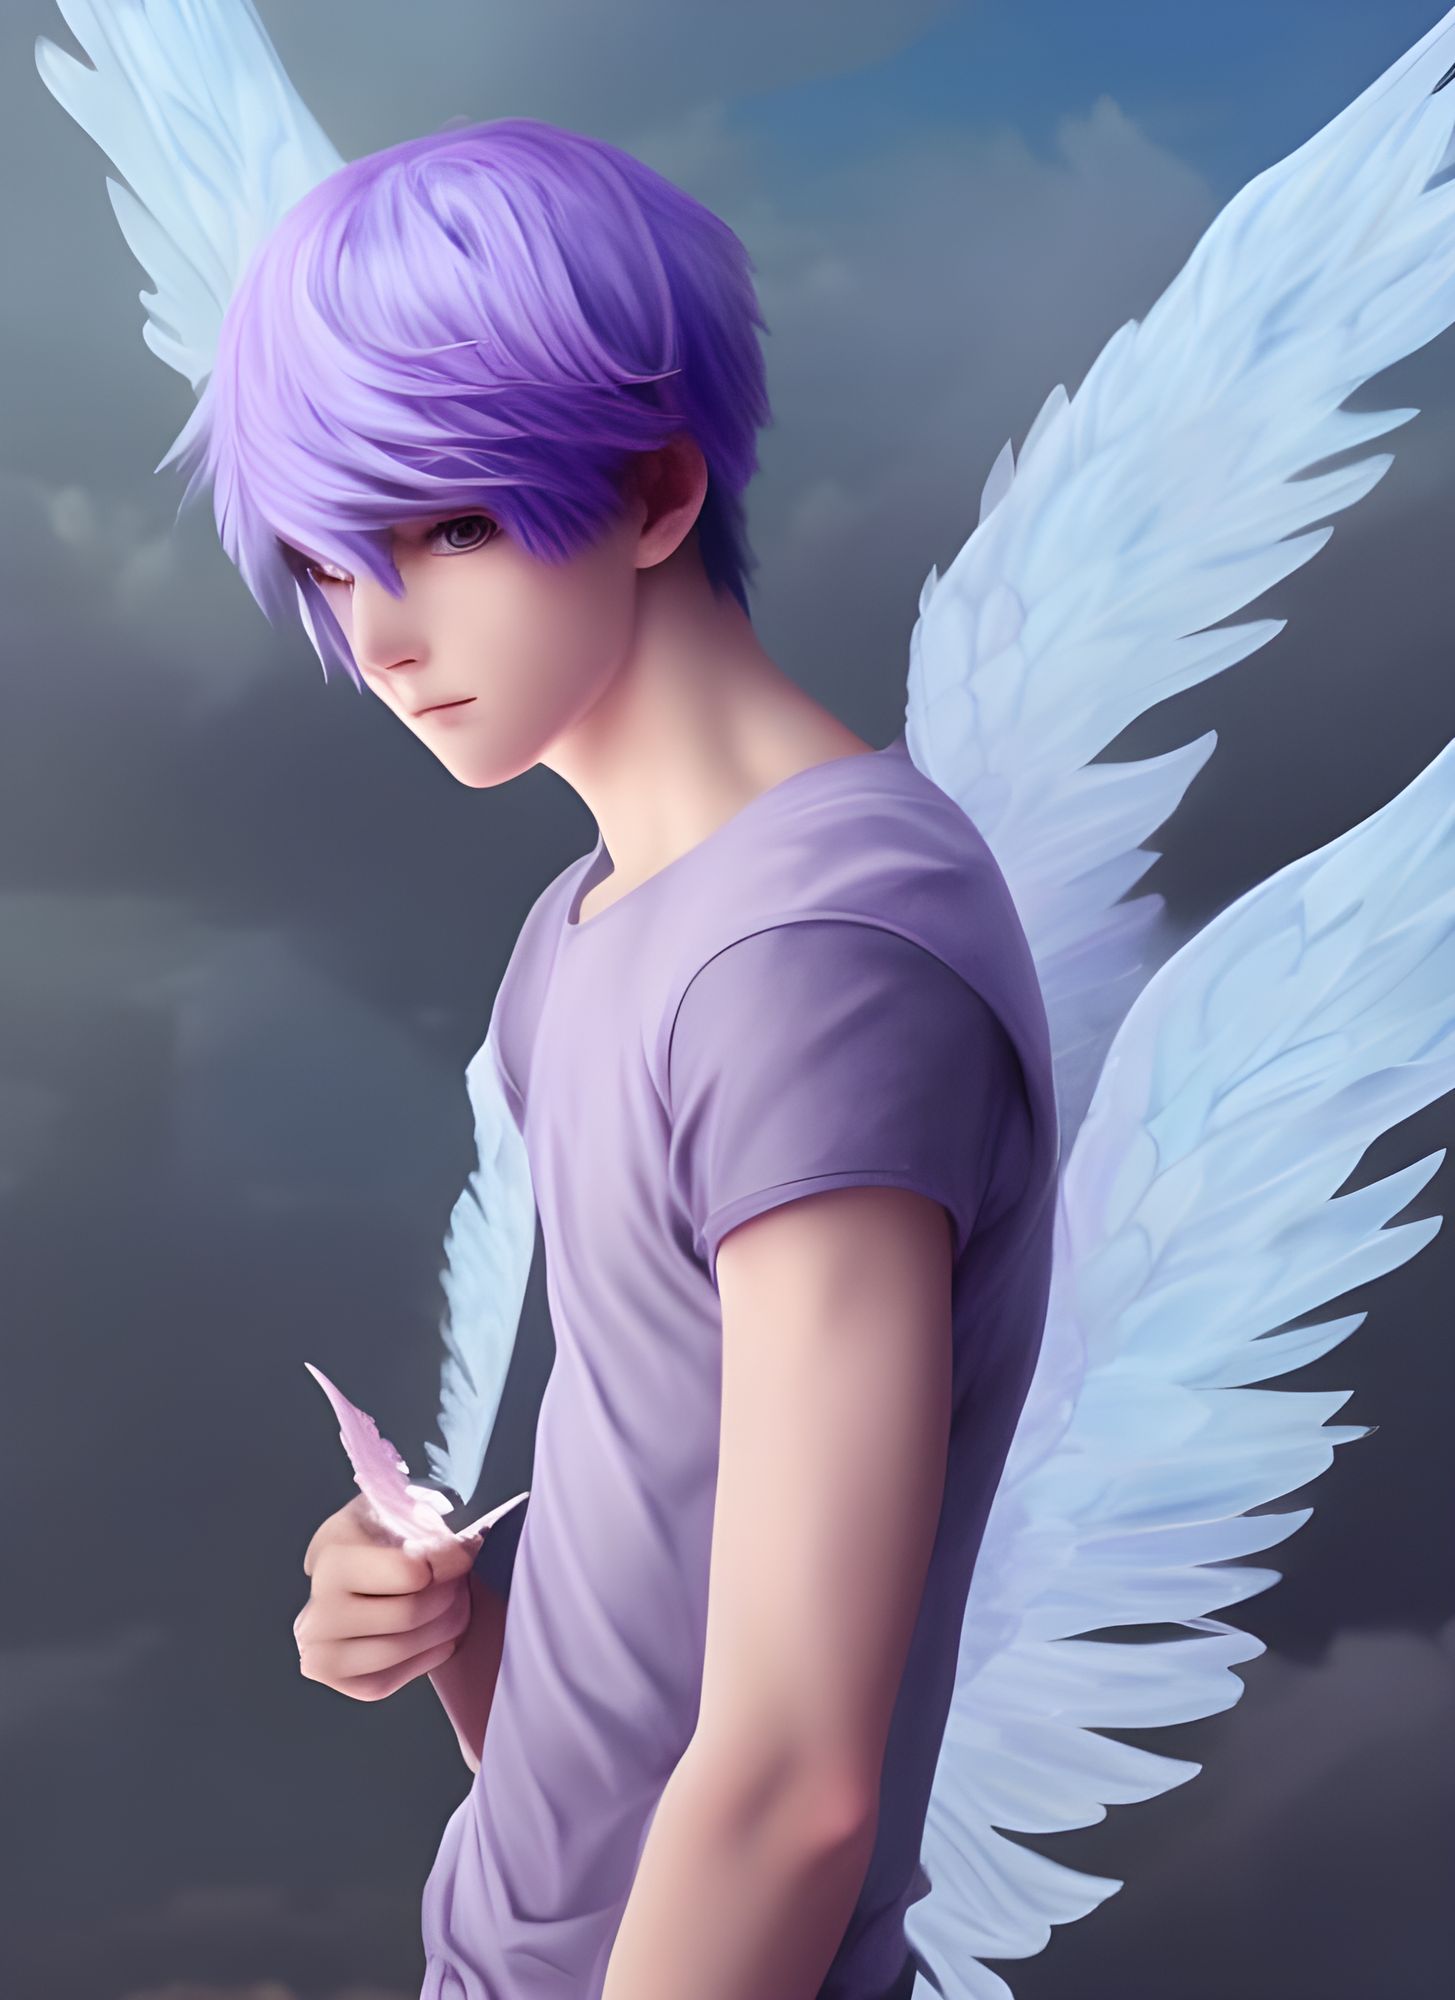 How To Draw Anime Wings, Draw An Anime Angel, Step by Step, Drawing Guide,  by Dawn - DragoArt